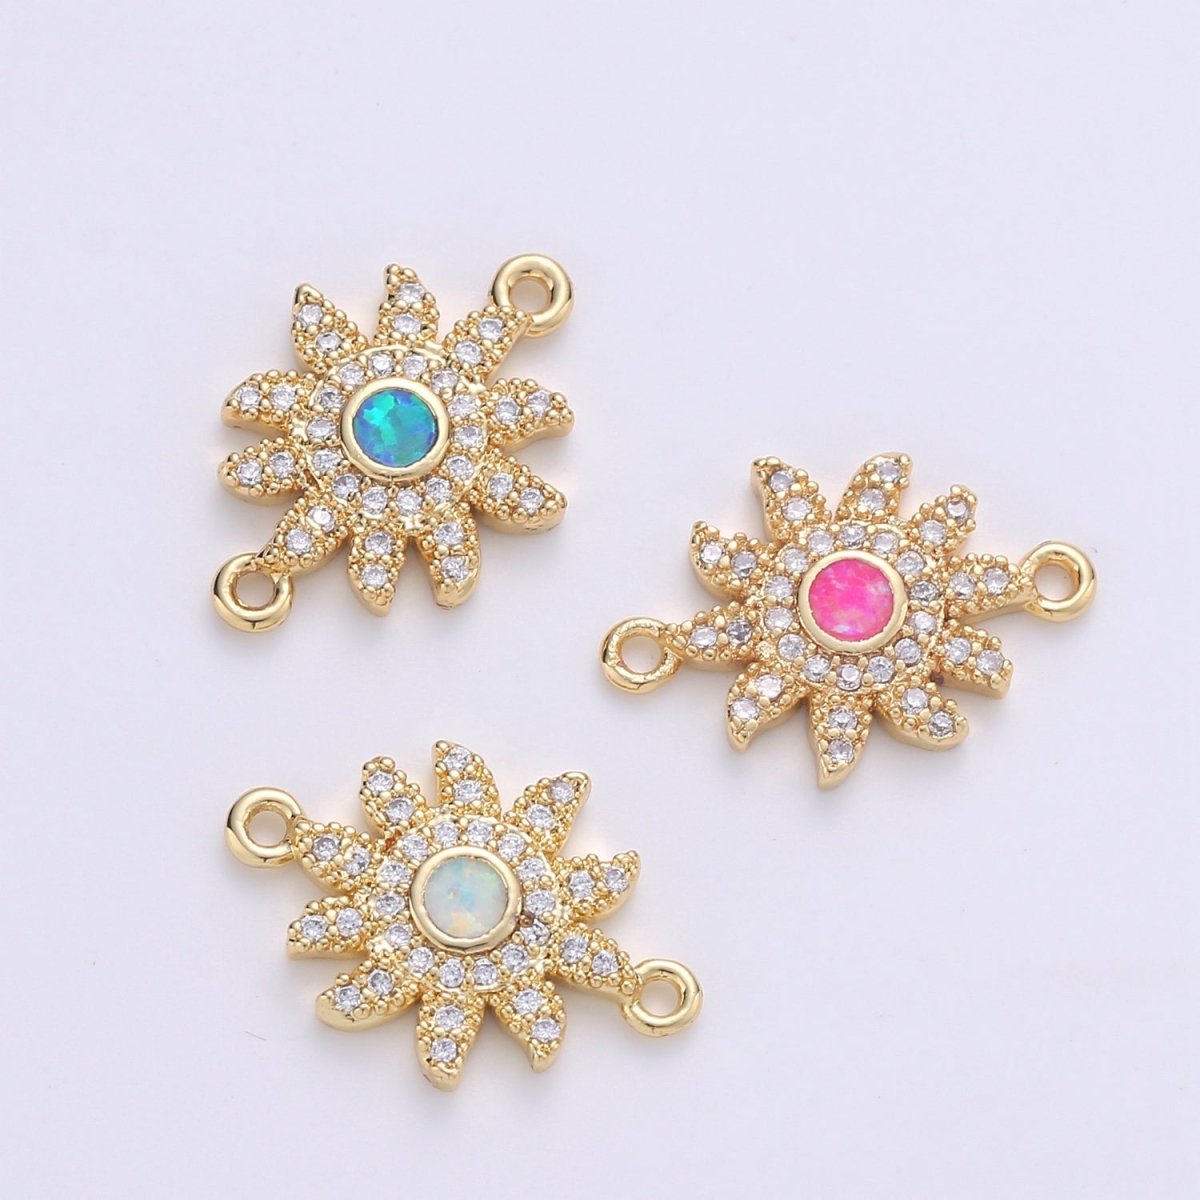 Dainty Opal Bracelet Connector Gold Sun Charm 18k Gold Fill Sunburst Charm Connector for Bracelet Necklace Earring Charm Component F-497 F-498 F-499 - DLUXCA